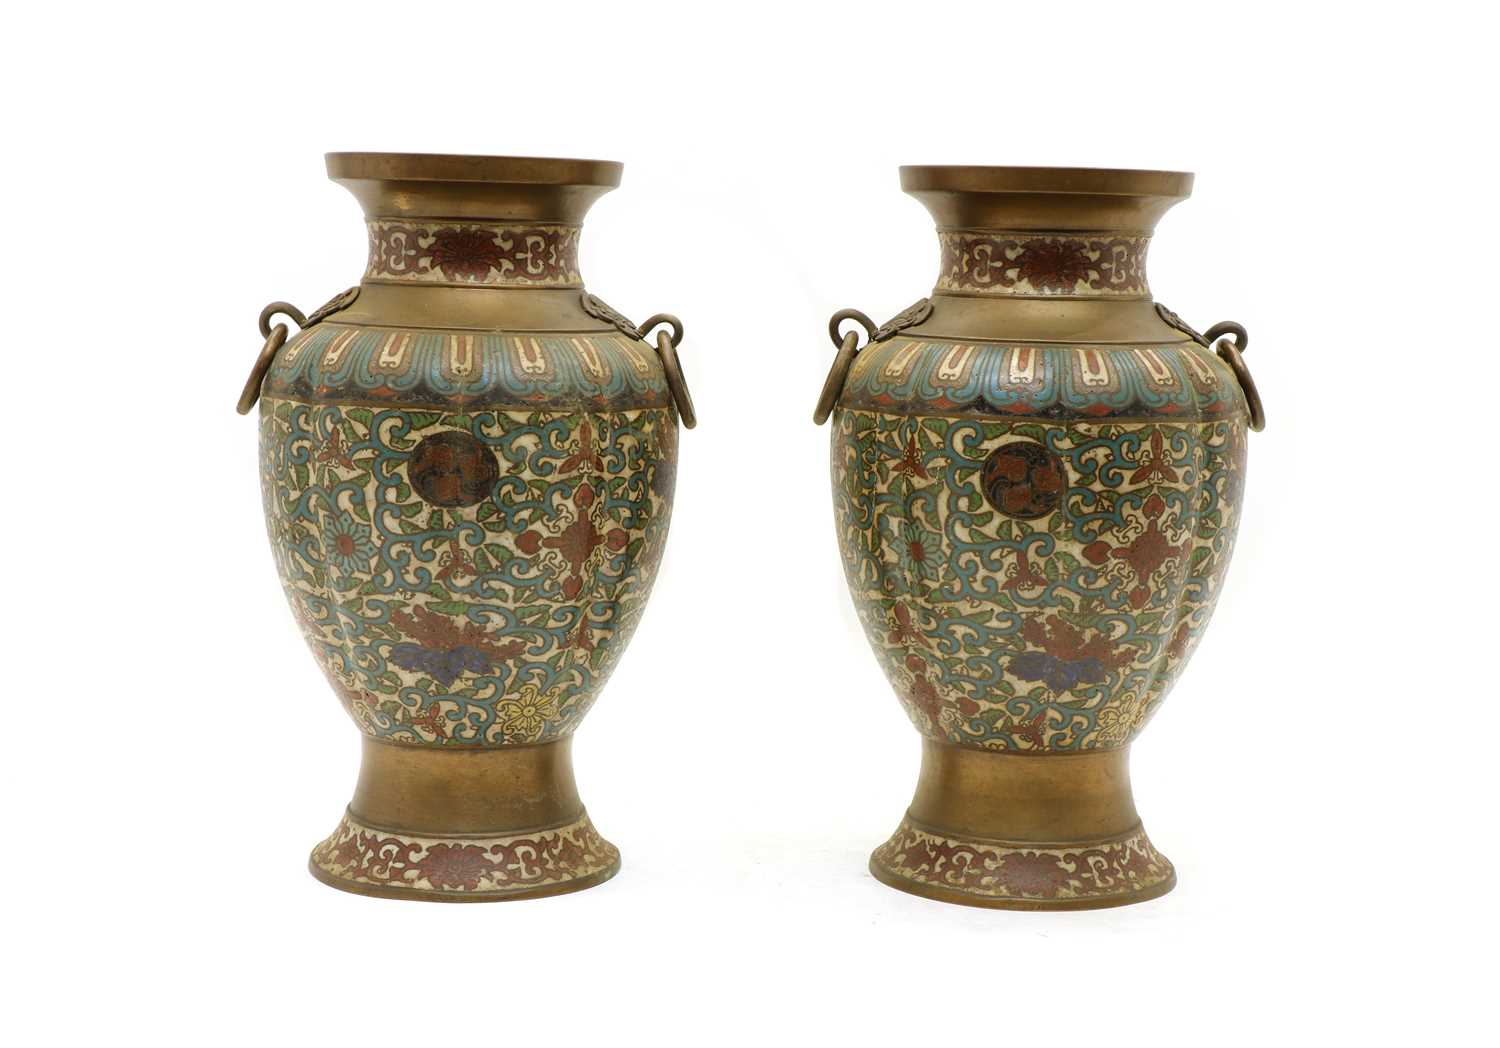 Lot 140 - A pair of Chinese cloisonné vases